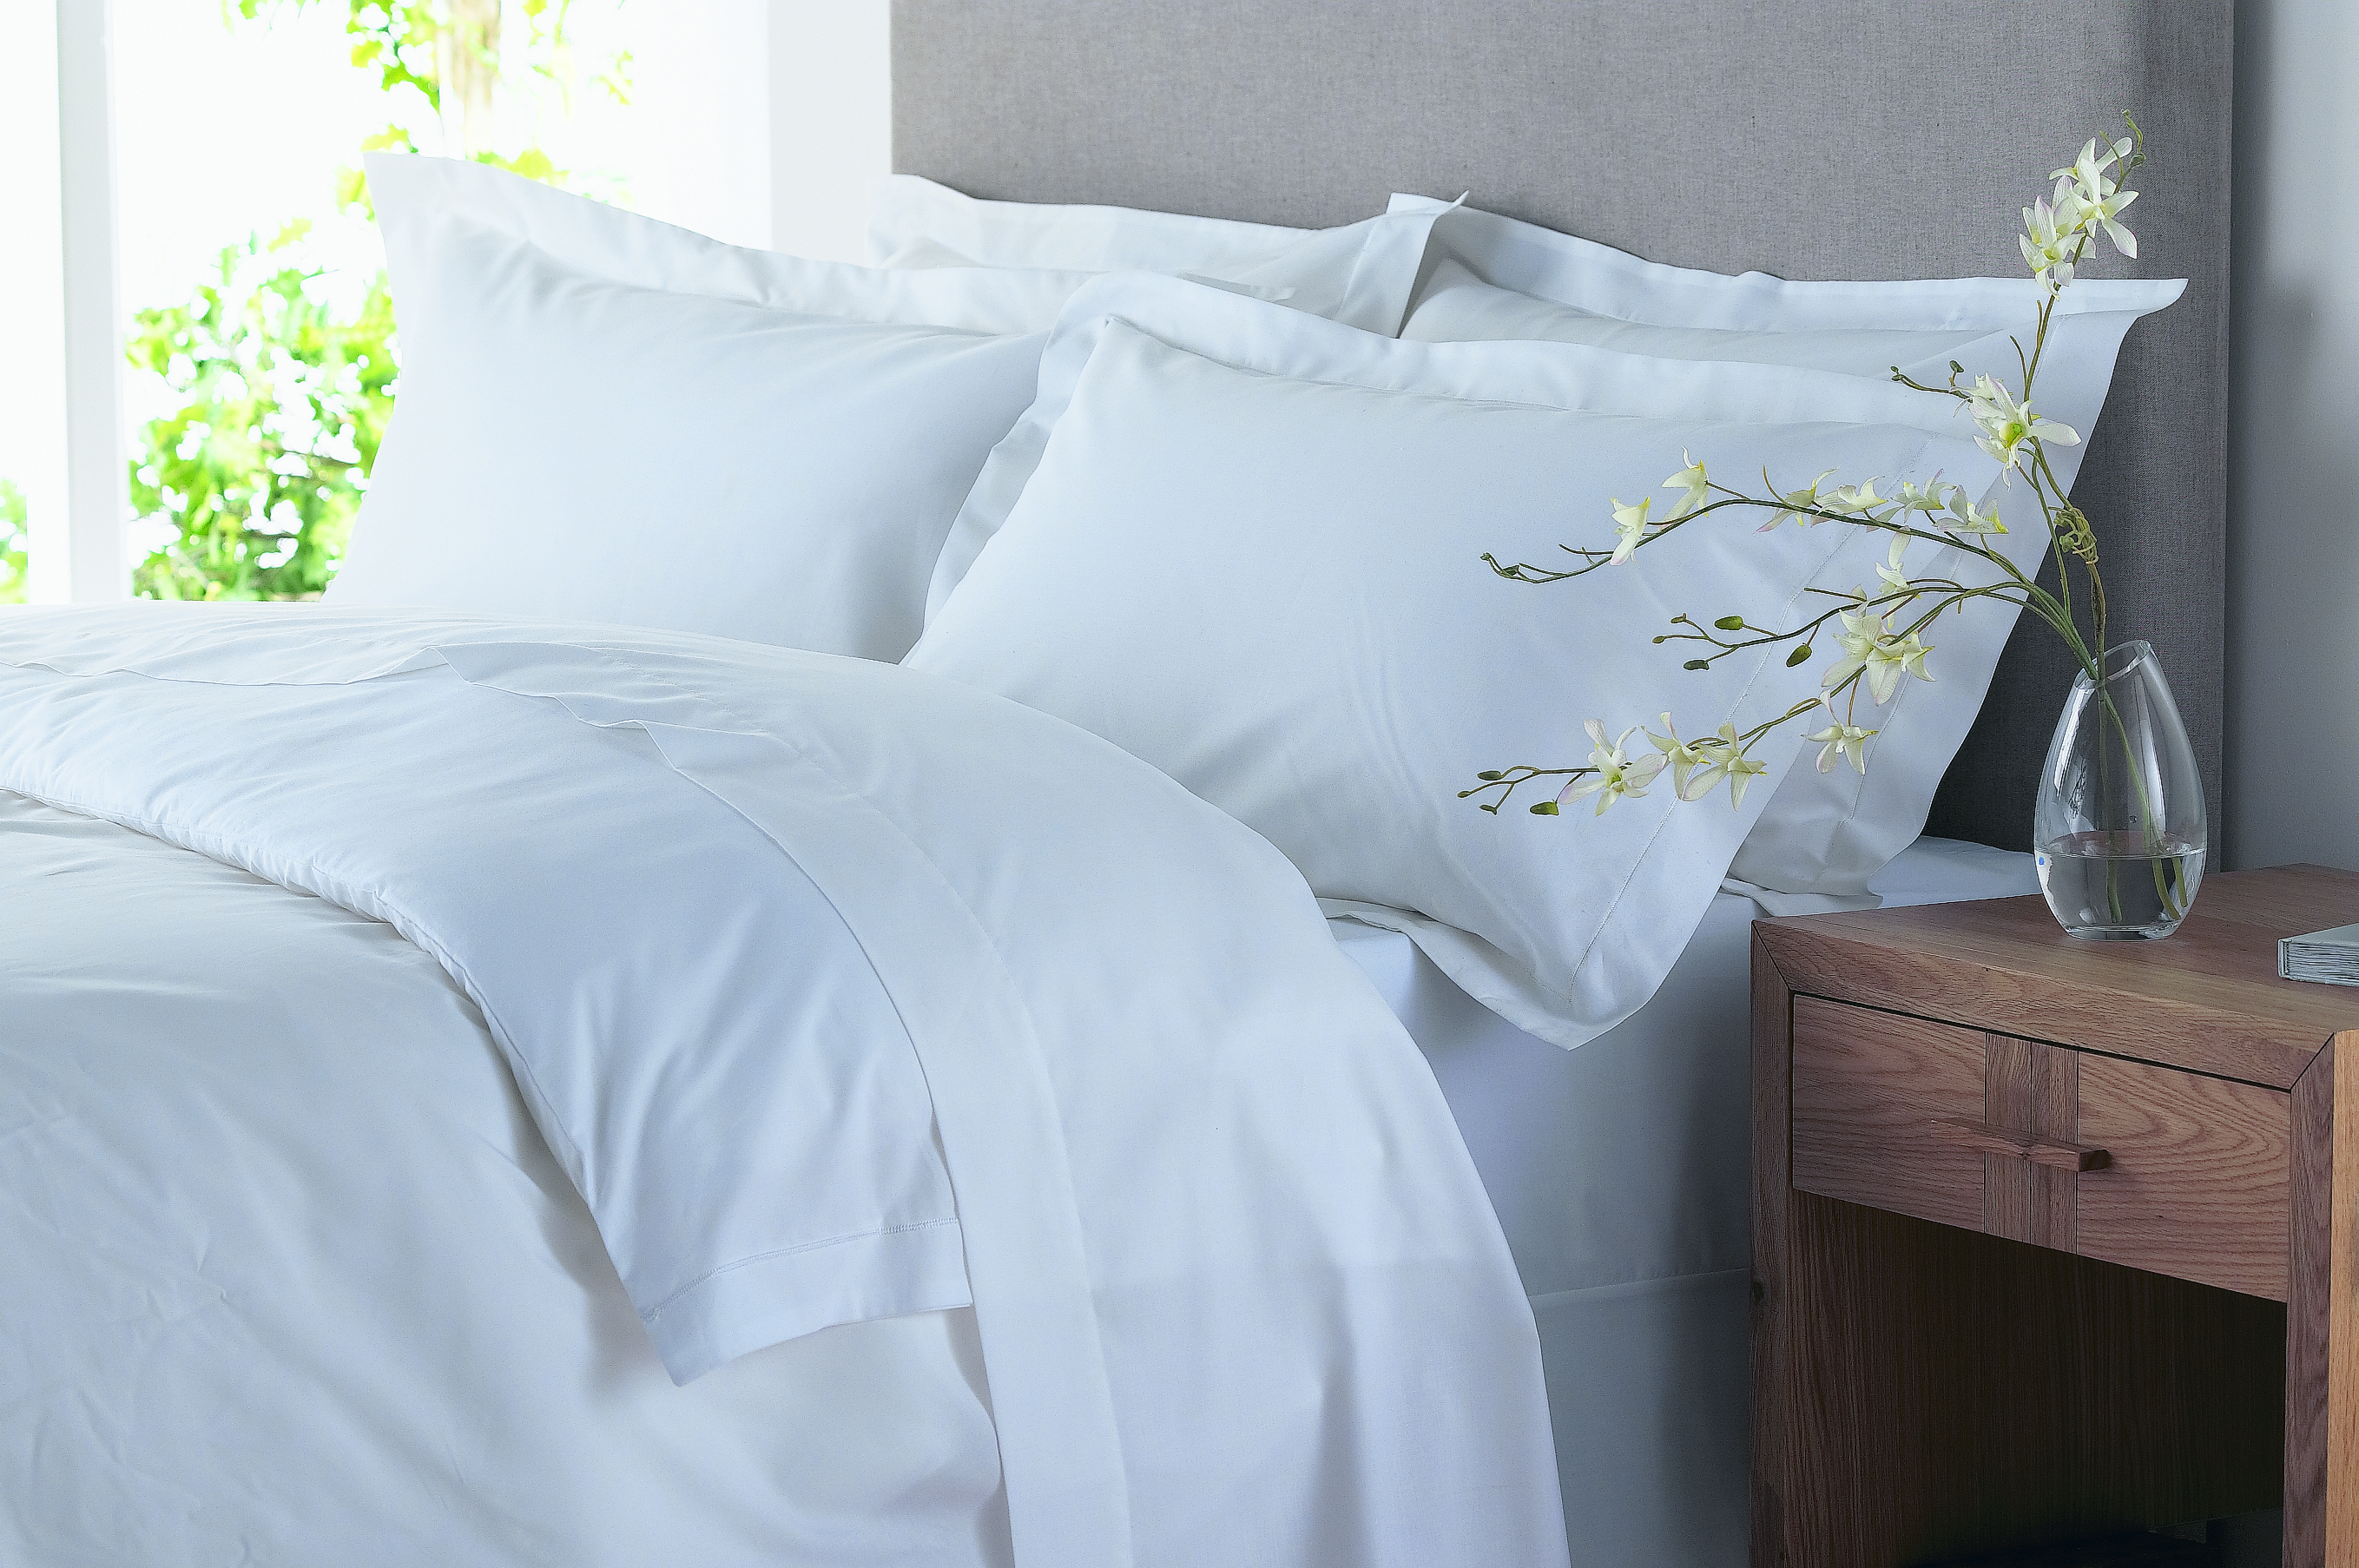 The Fine Bedding Company Hotel Division Duvet and Pillows 